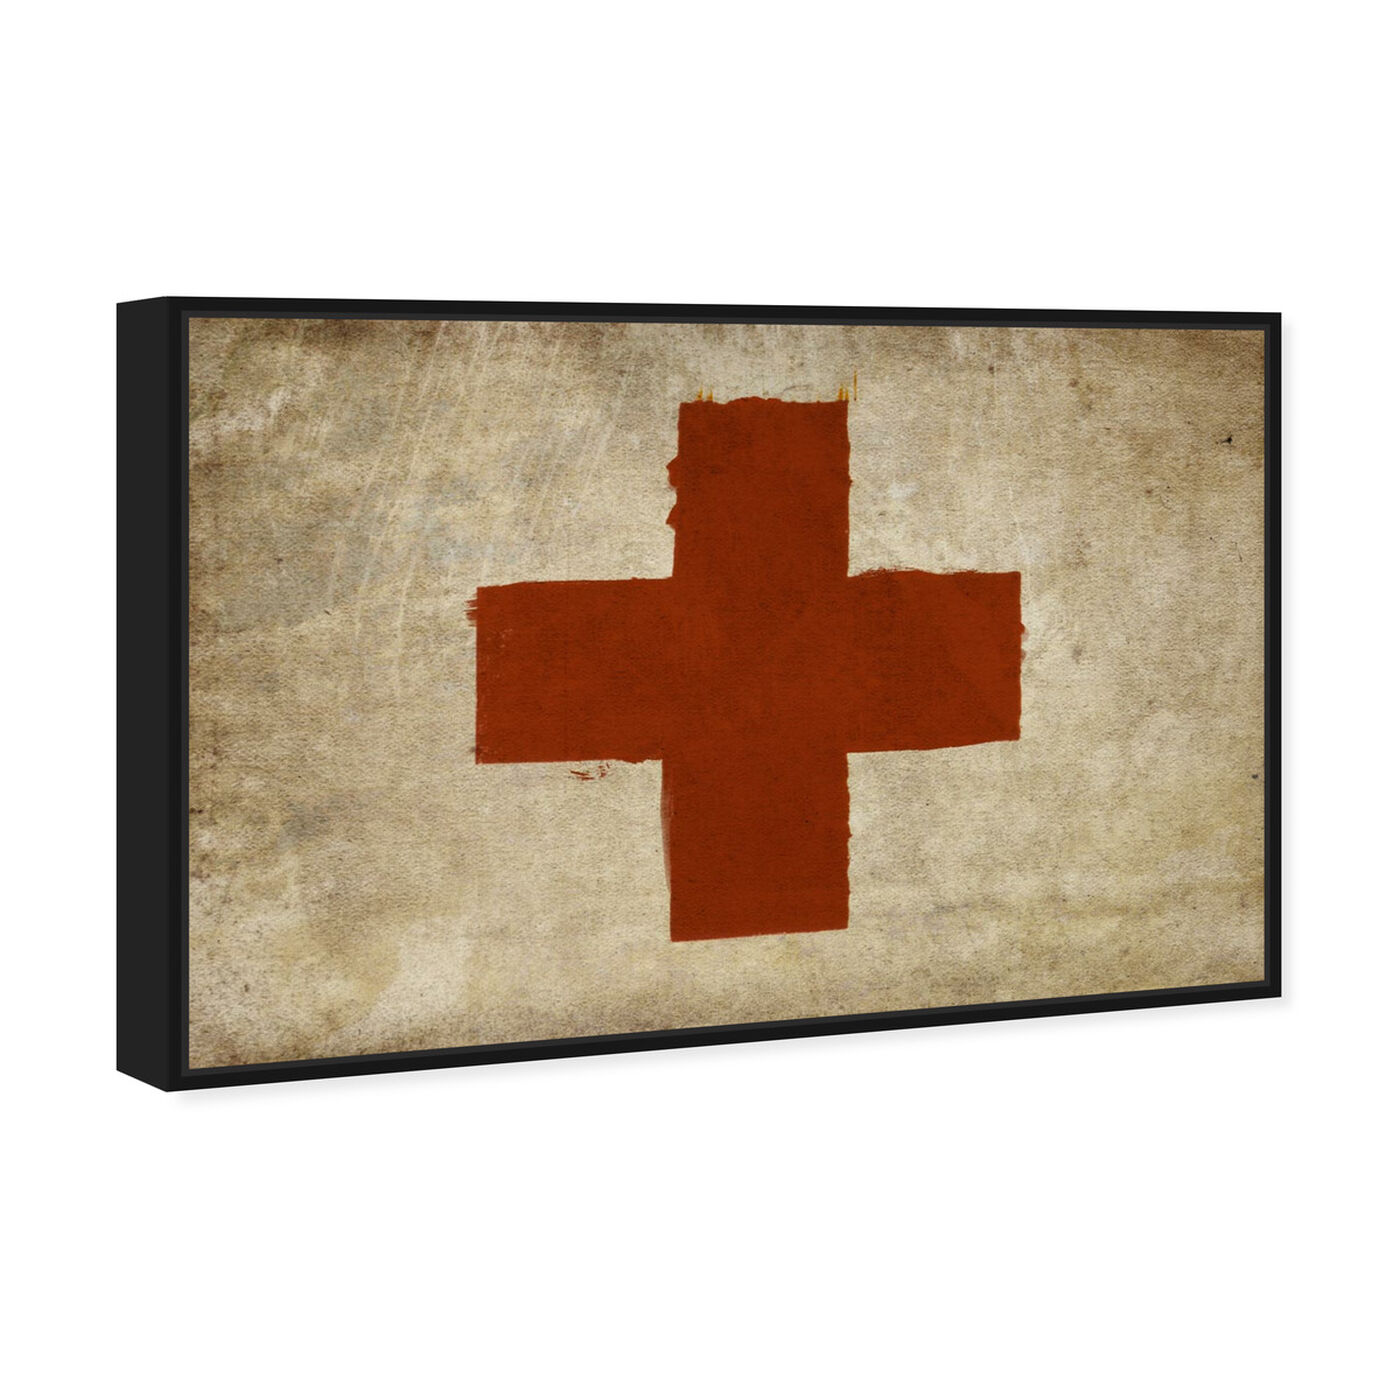 Angled view of Red Cross featuring symbols and objects and shapes art.